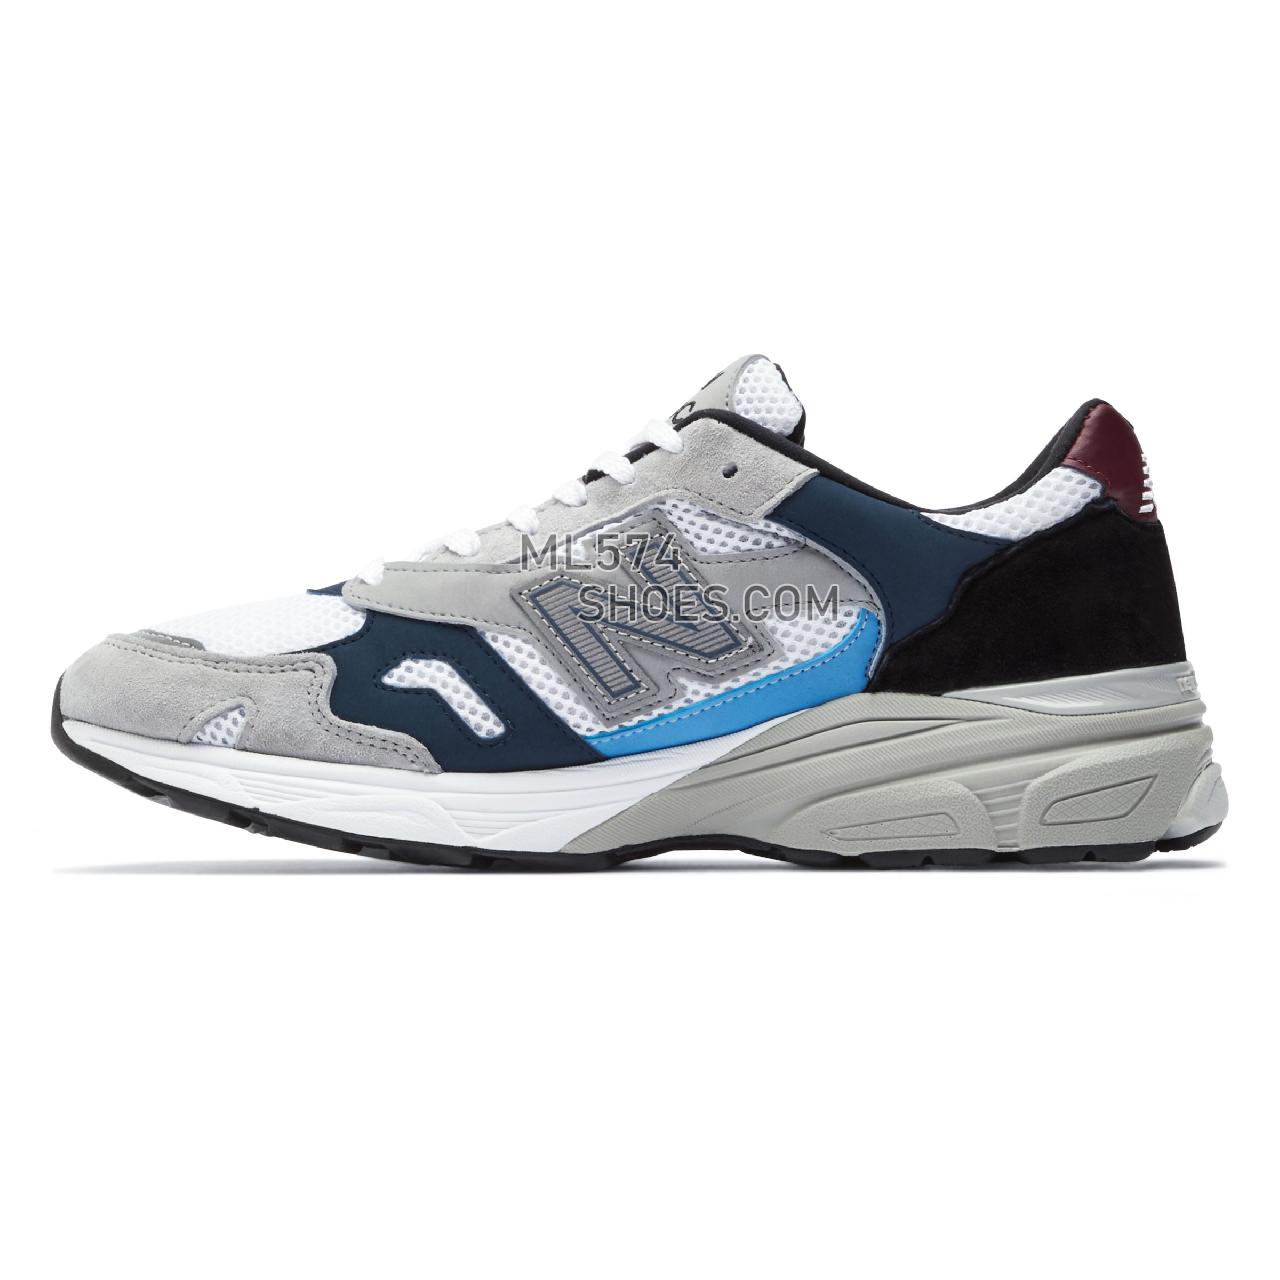 New Balance Made in UK 920 - Unisex Men's Women's Made in USA And UK Sneakers - Off white with black and navy - M920NBR